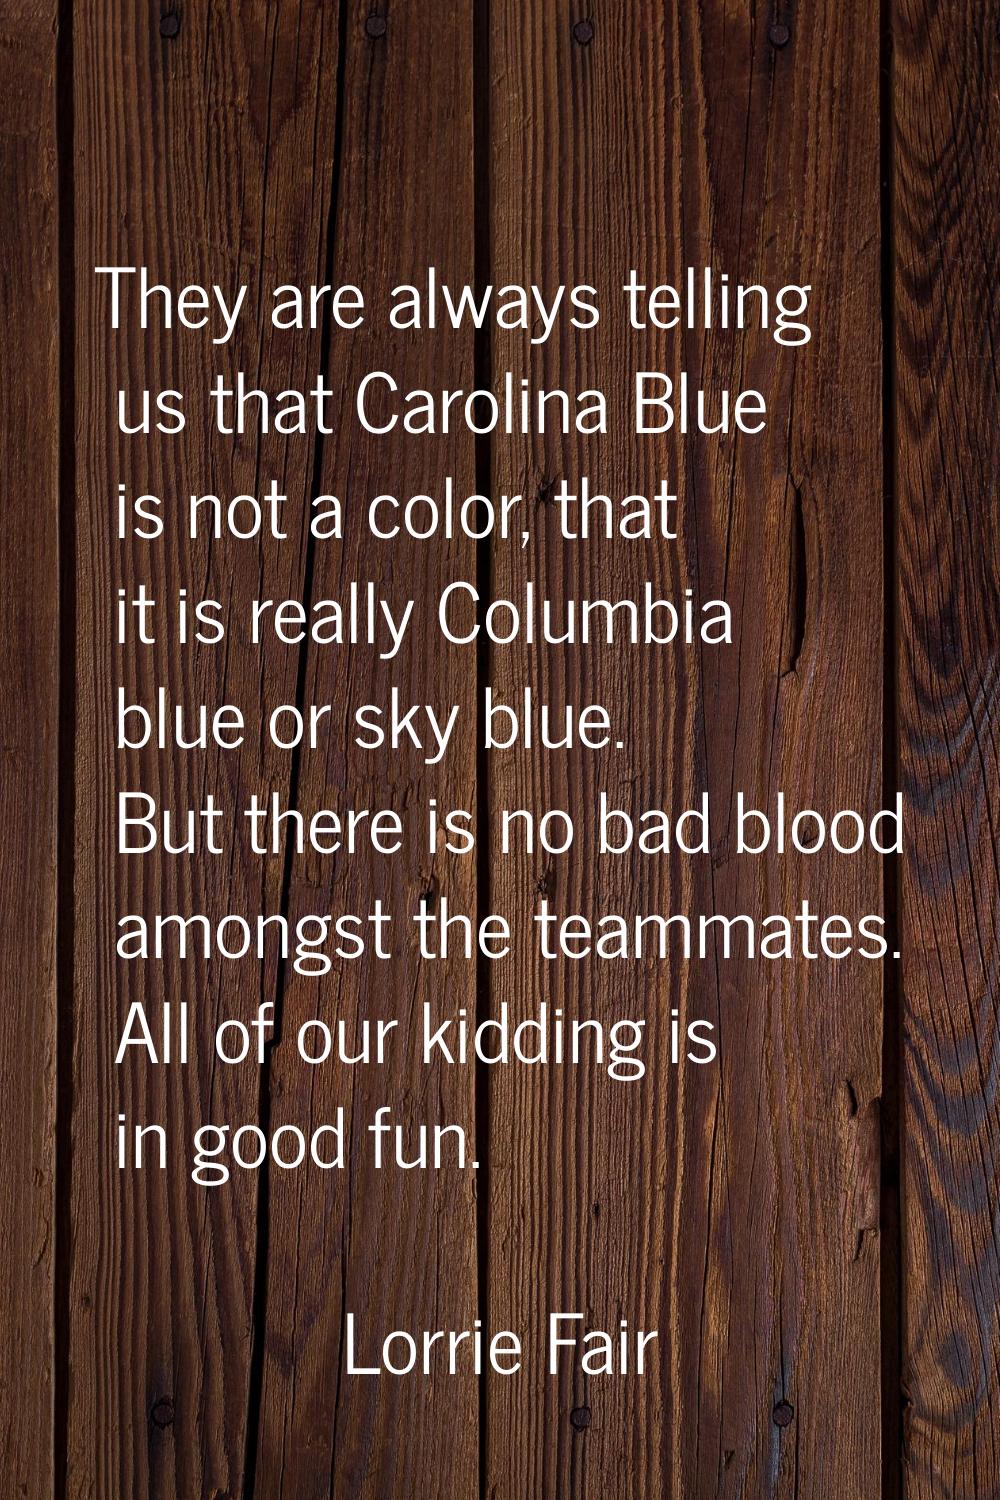 They are always telling us that Carolina Blue is not a color, that it is really Columbia blue or sk